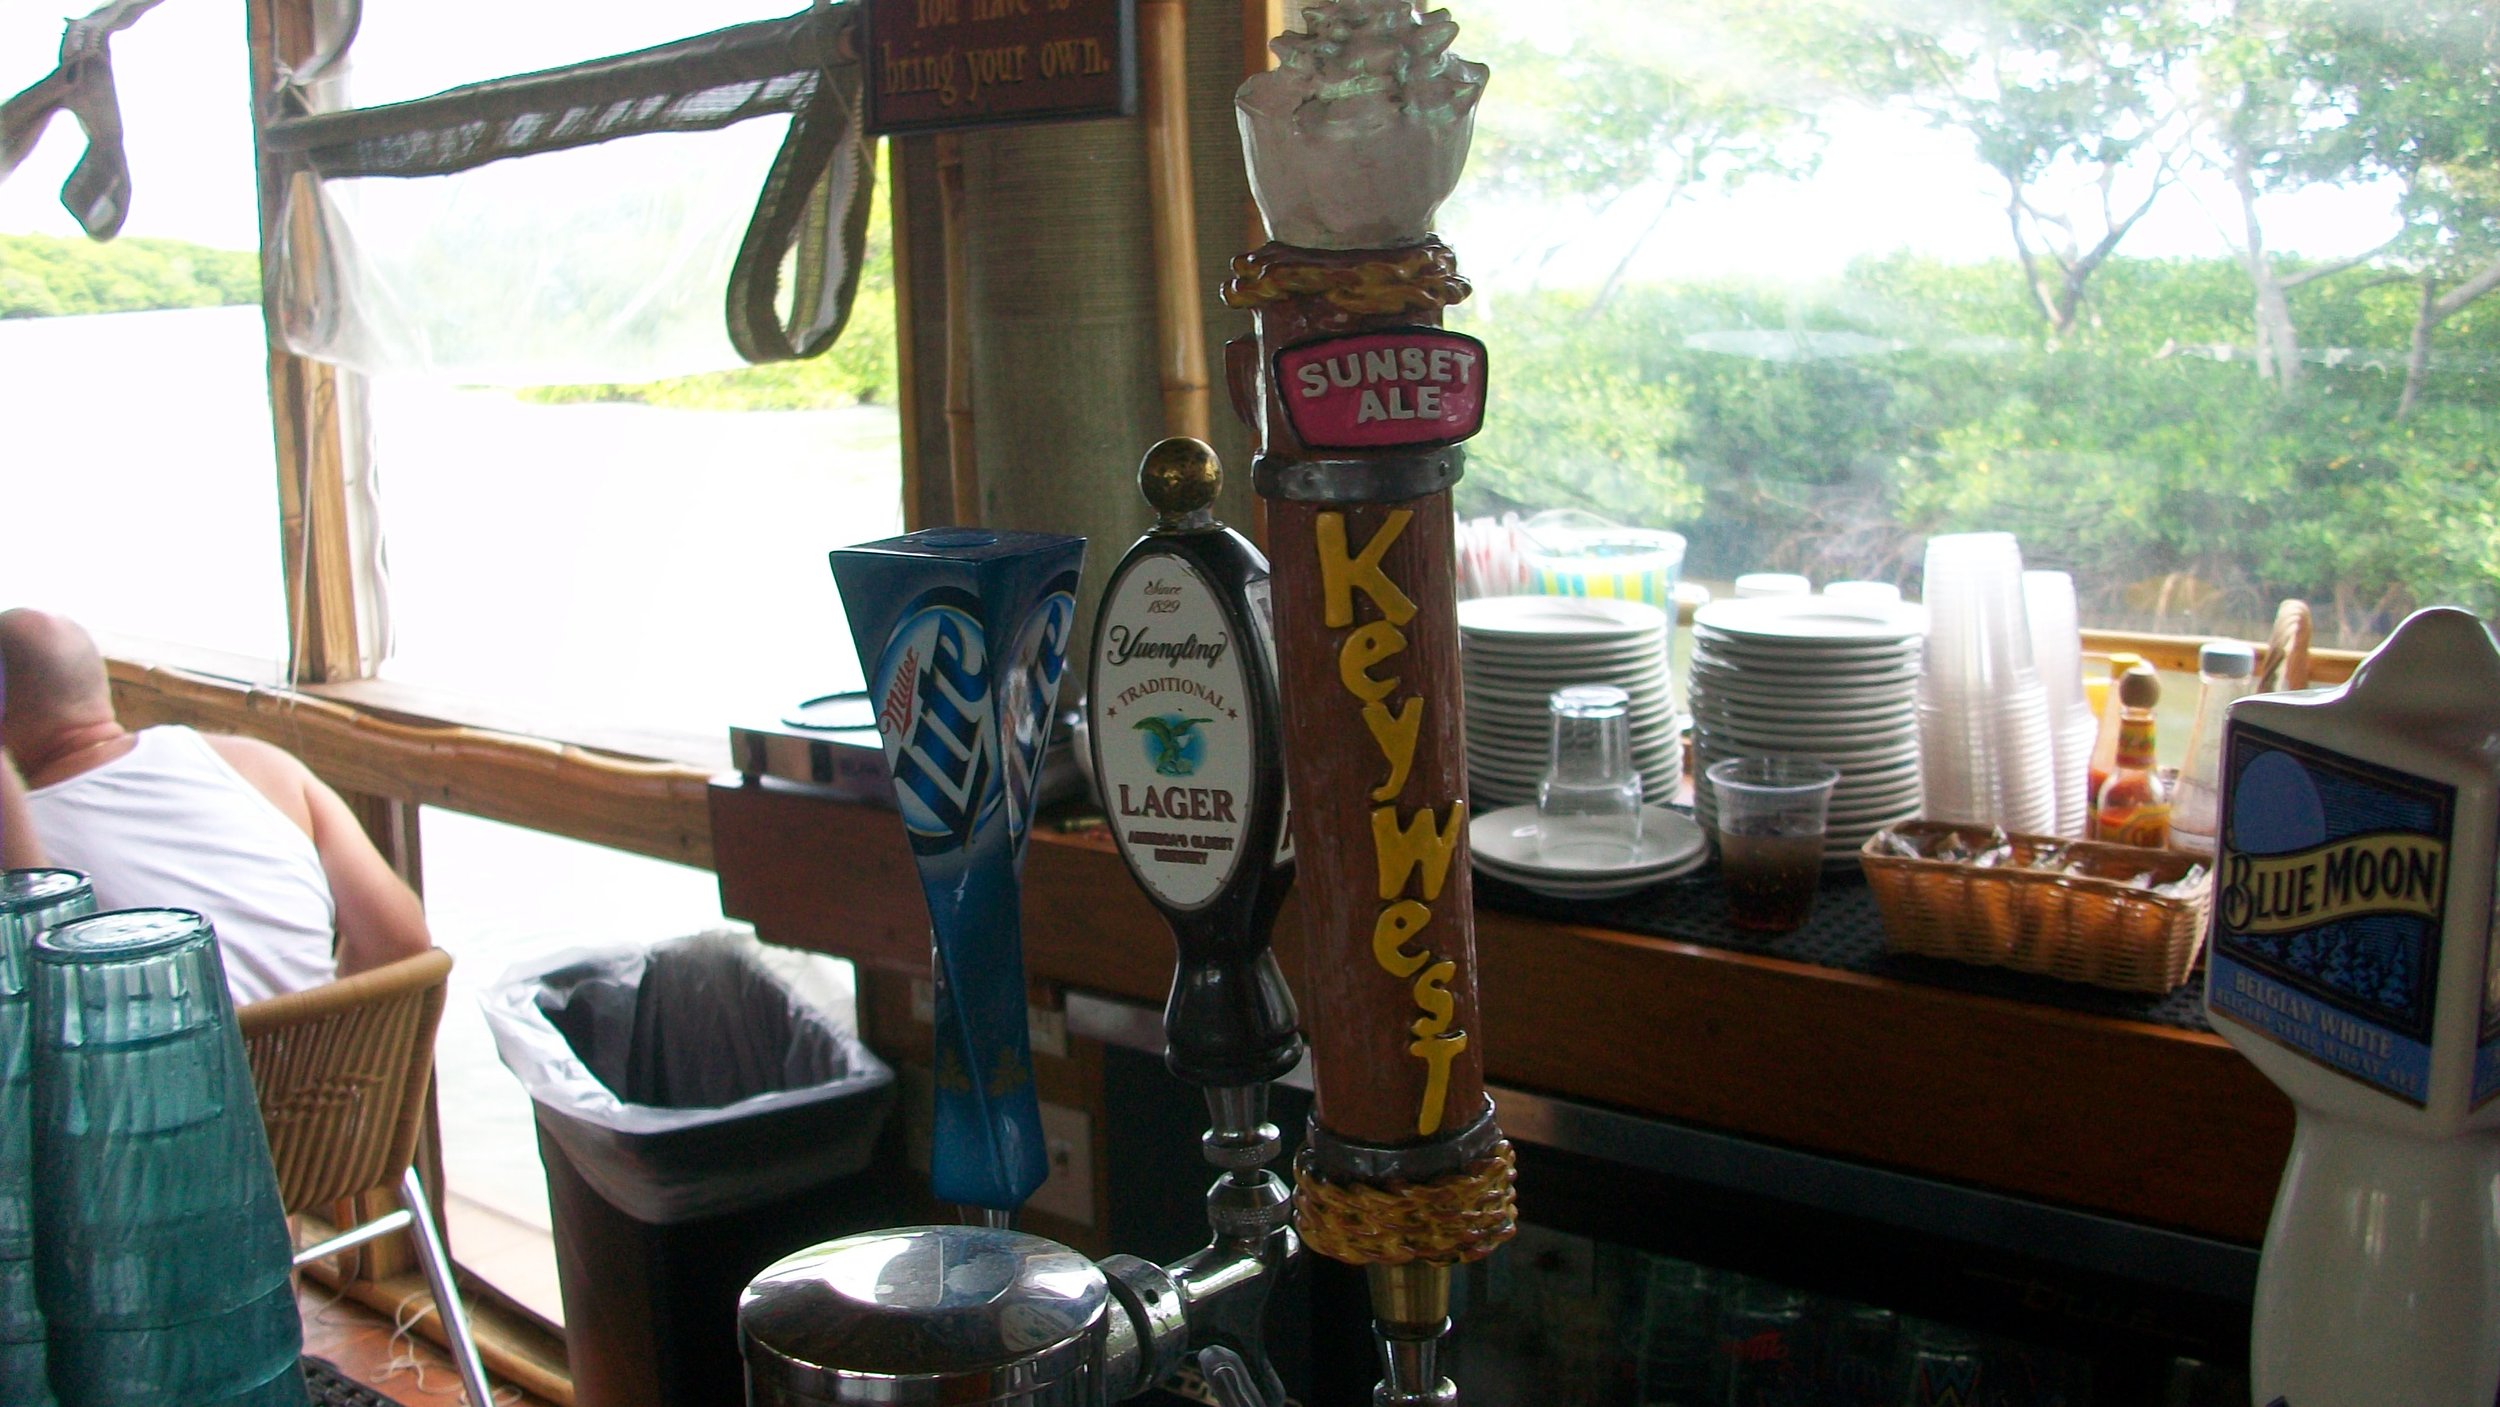 Island Grill Beer Tap